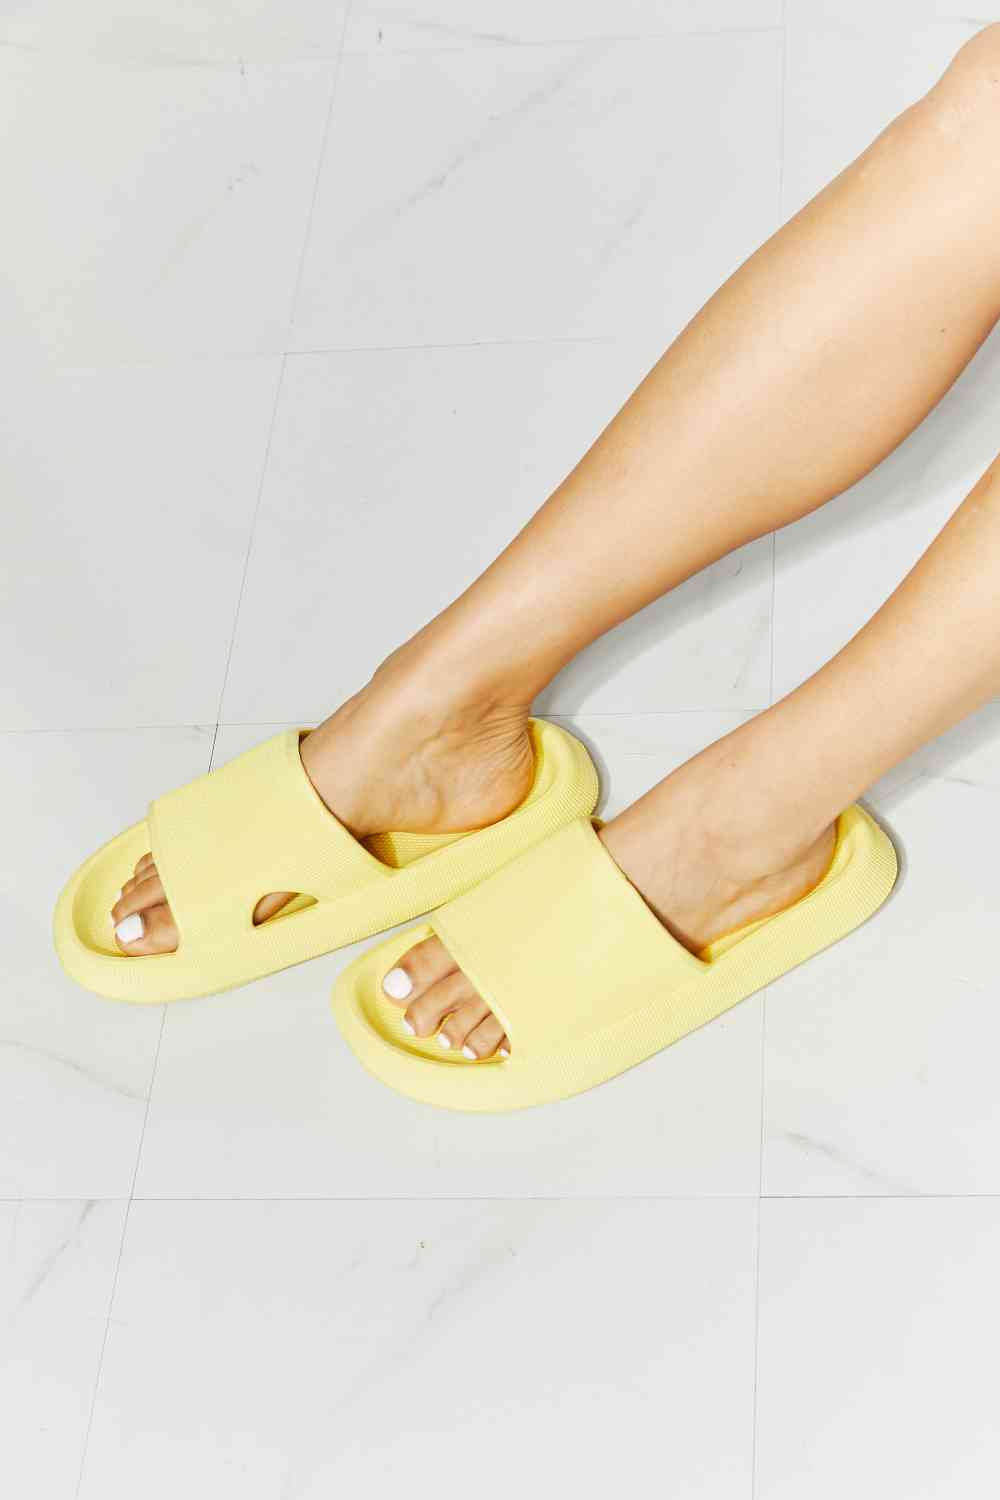 Arms Around Me Open Toe Slide in Yellow - Accessories - Shoes - 3 - 2024